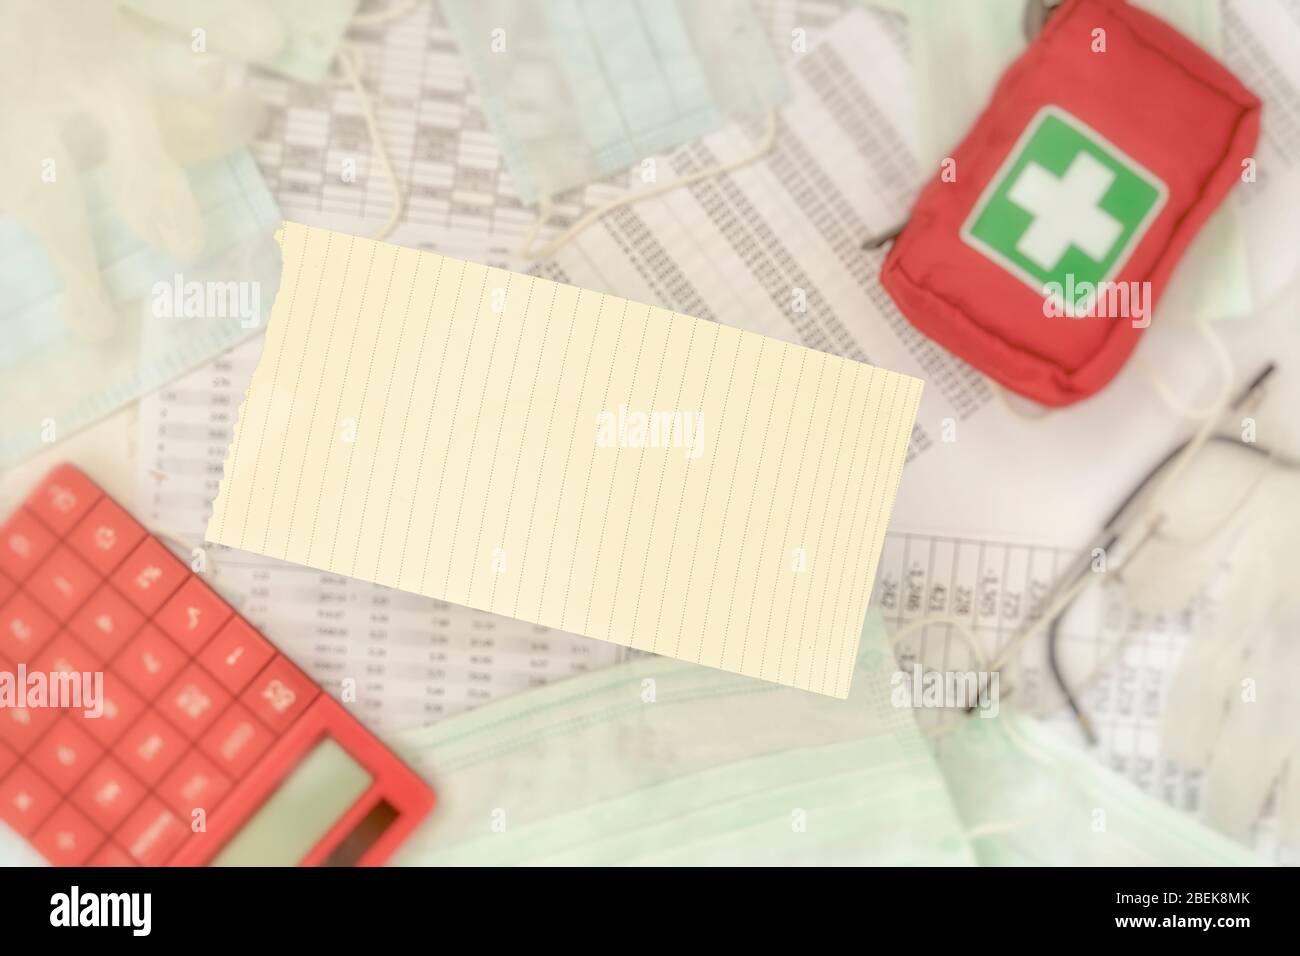 Torn from a notepad sheet in the blurry background of business tables, calculator and personal first aid kit. Remote work concept Stock Photo